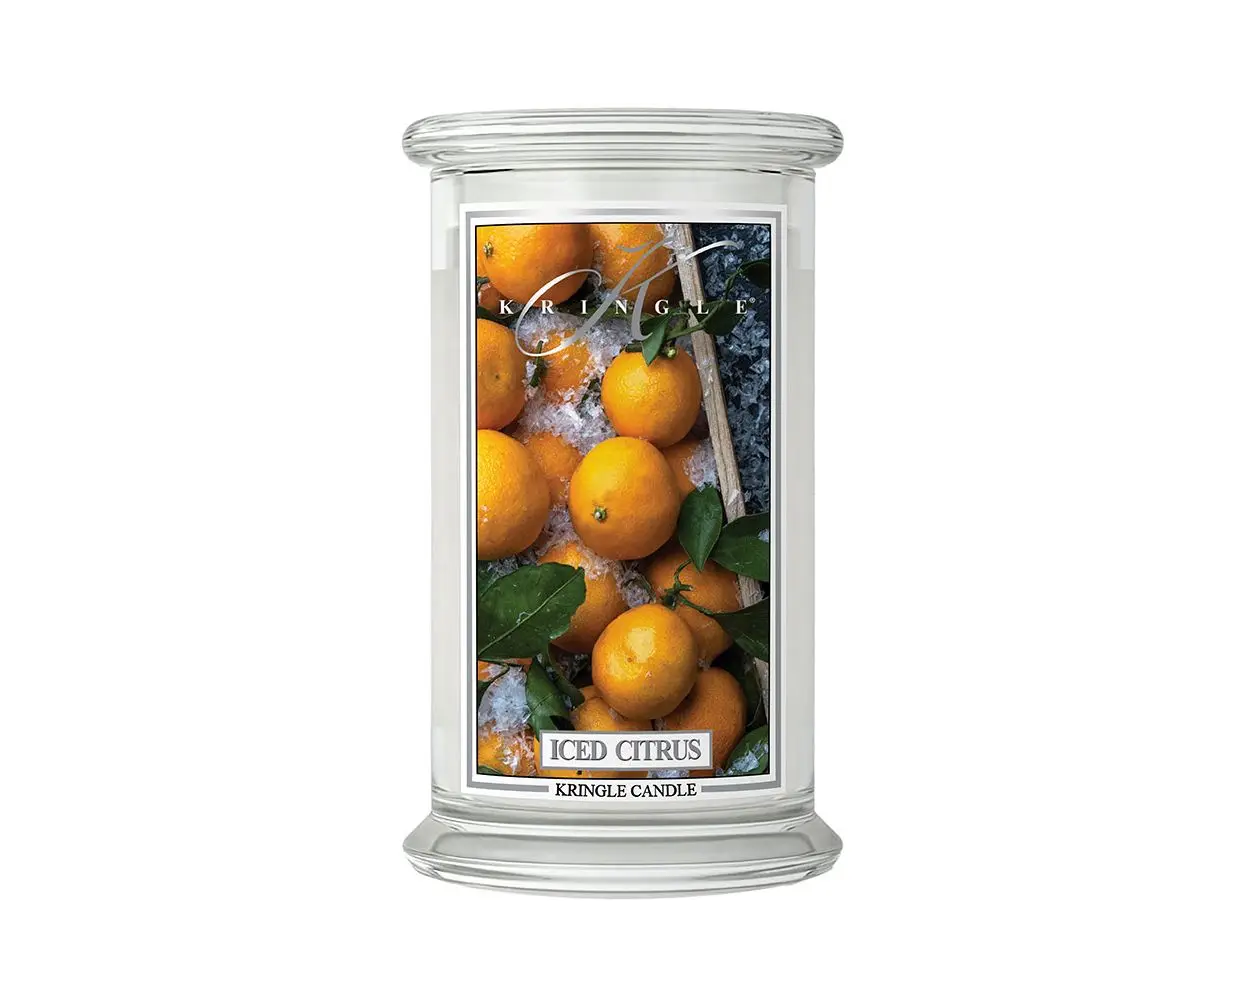 Gro脽e Classic Candle Iced Citrus